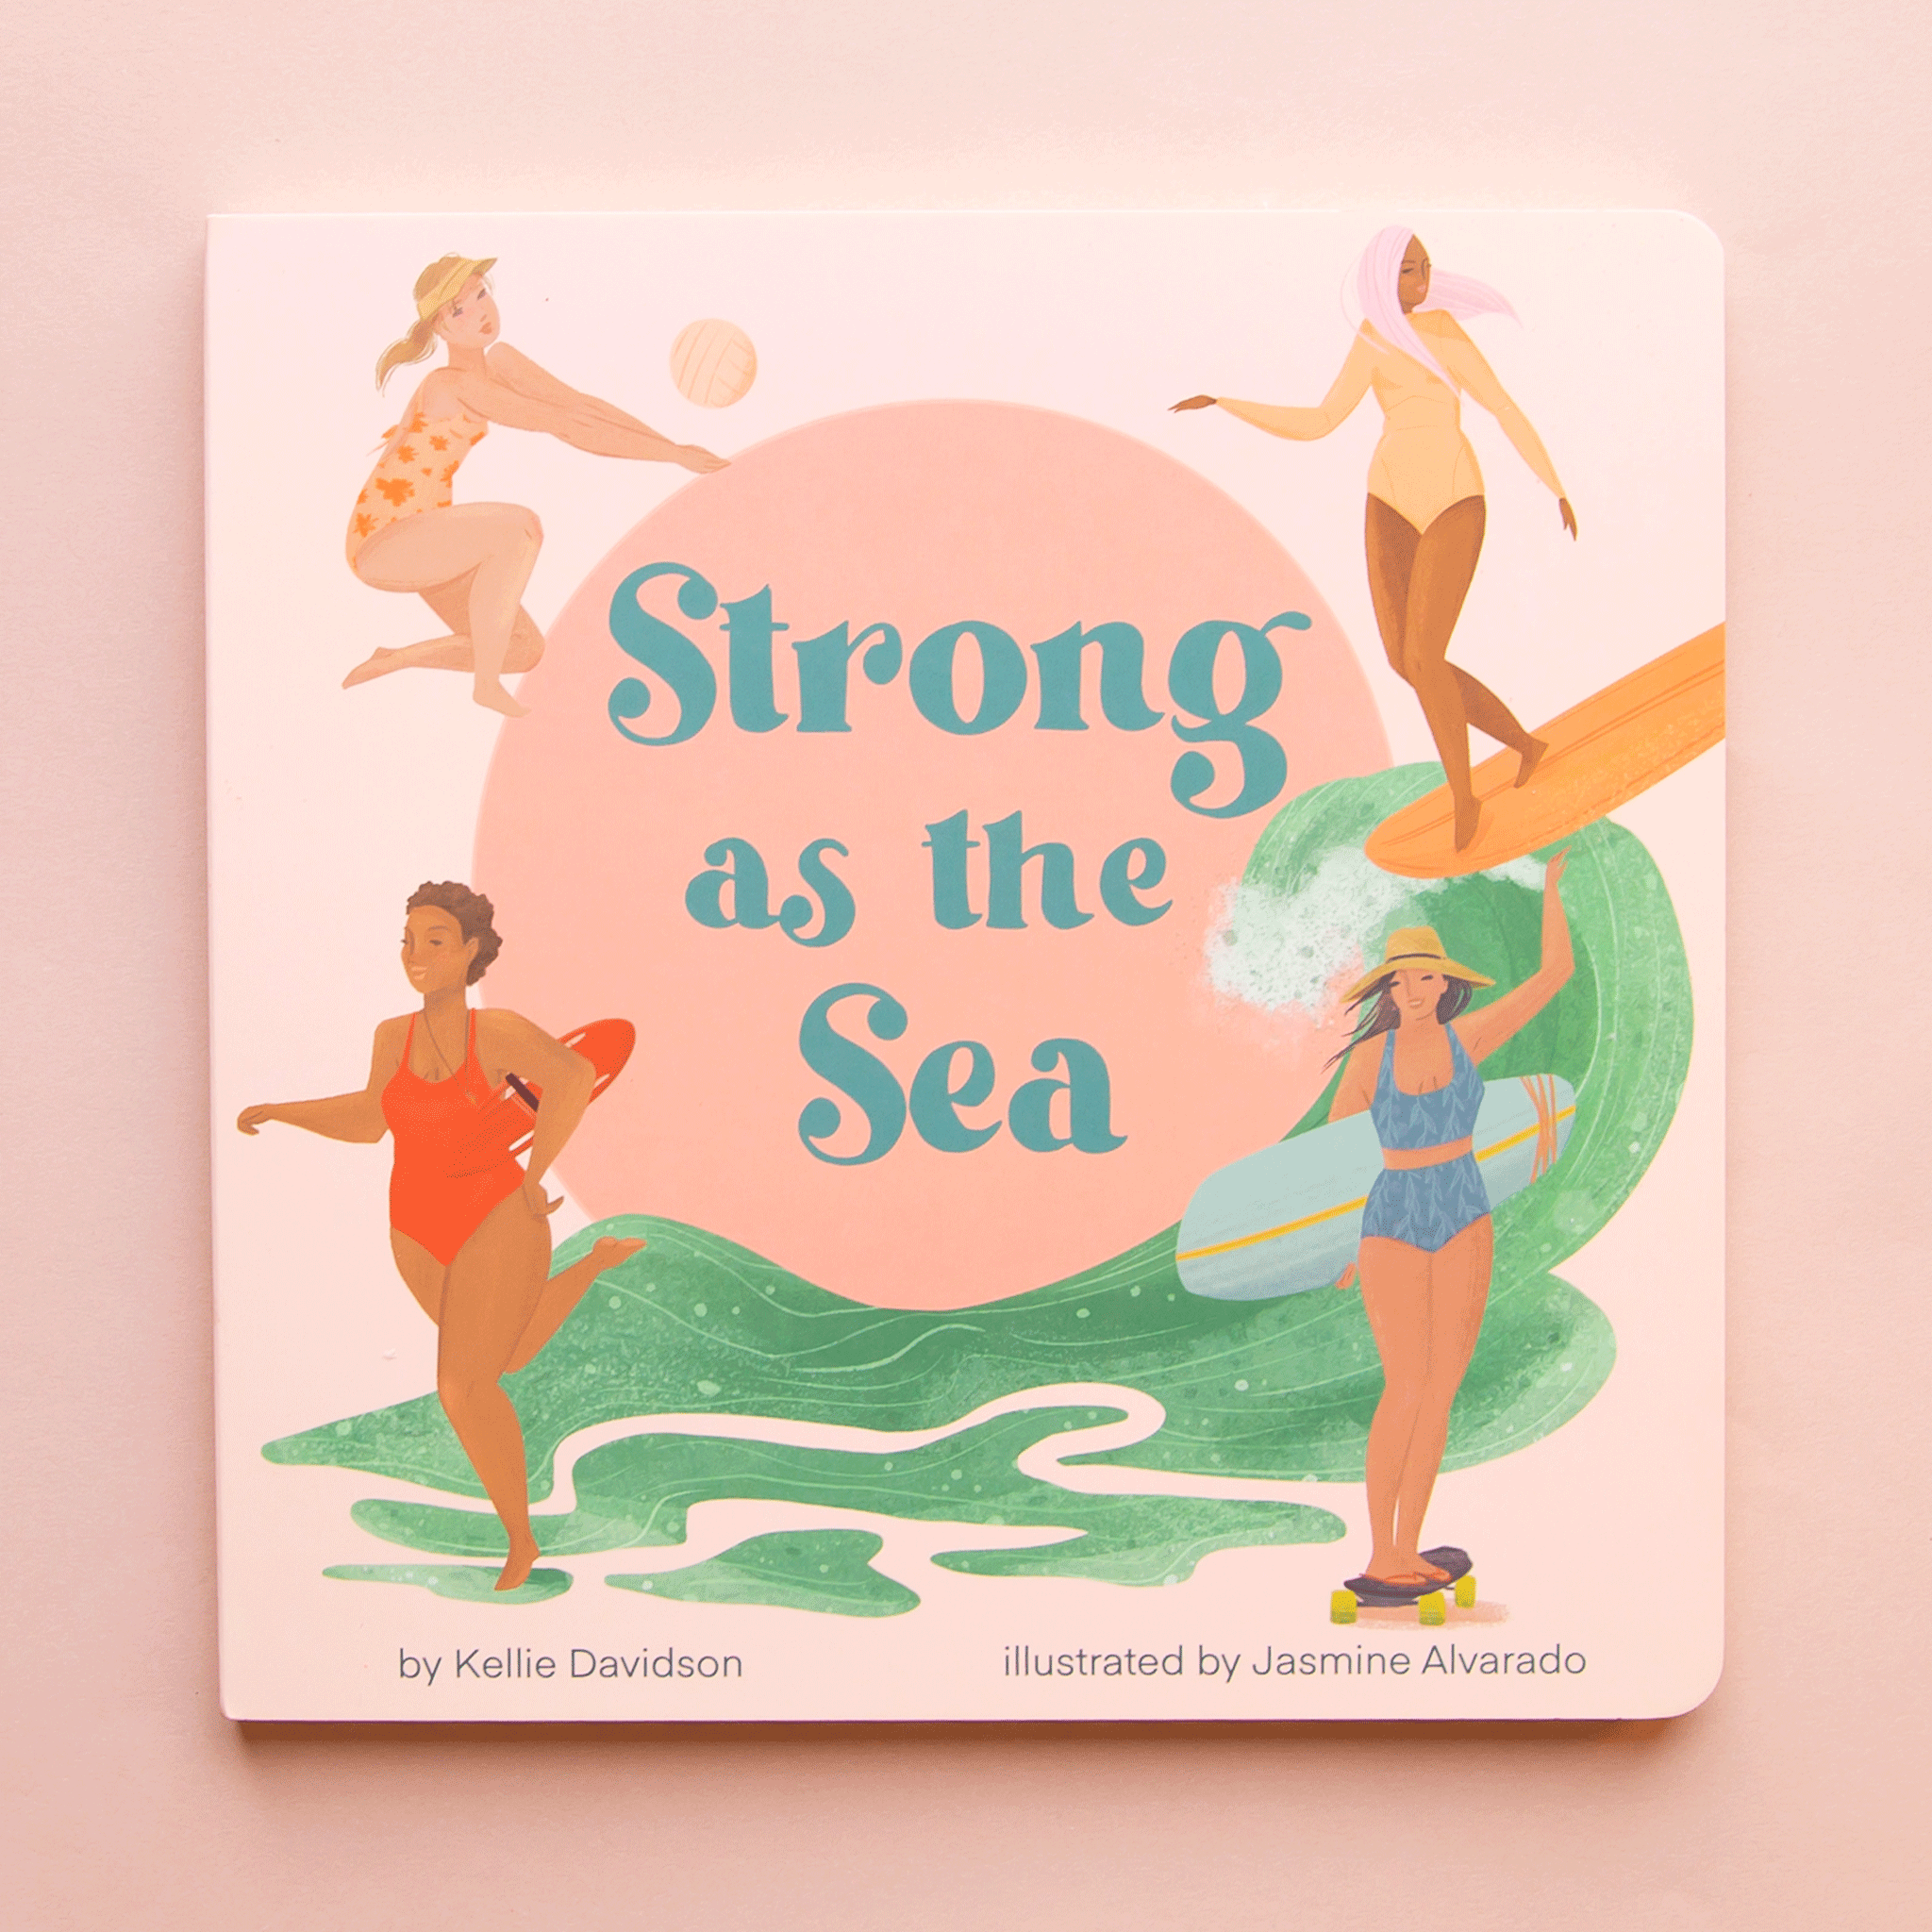 On a light pink background is a children's book with illustrations of four different women in each corner of beach themed book cover with blue text in the center that reads, "Strong as the Sea".